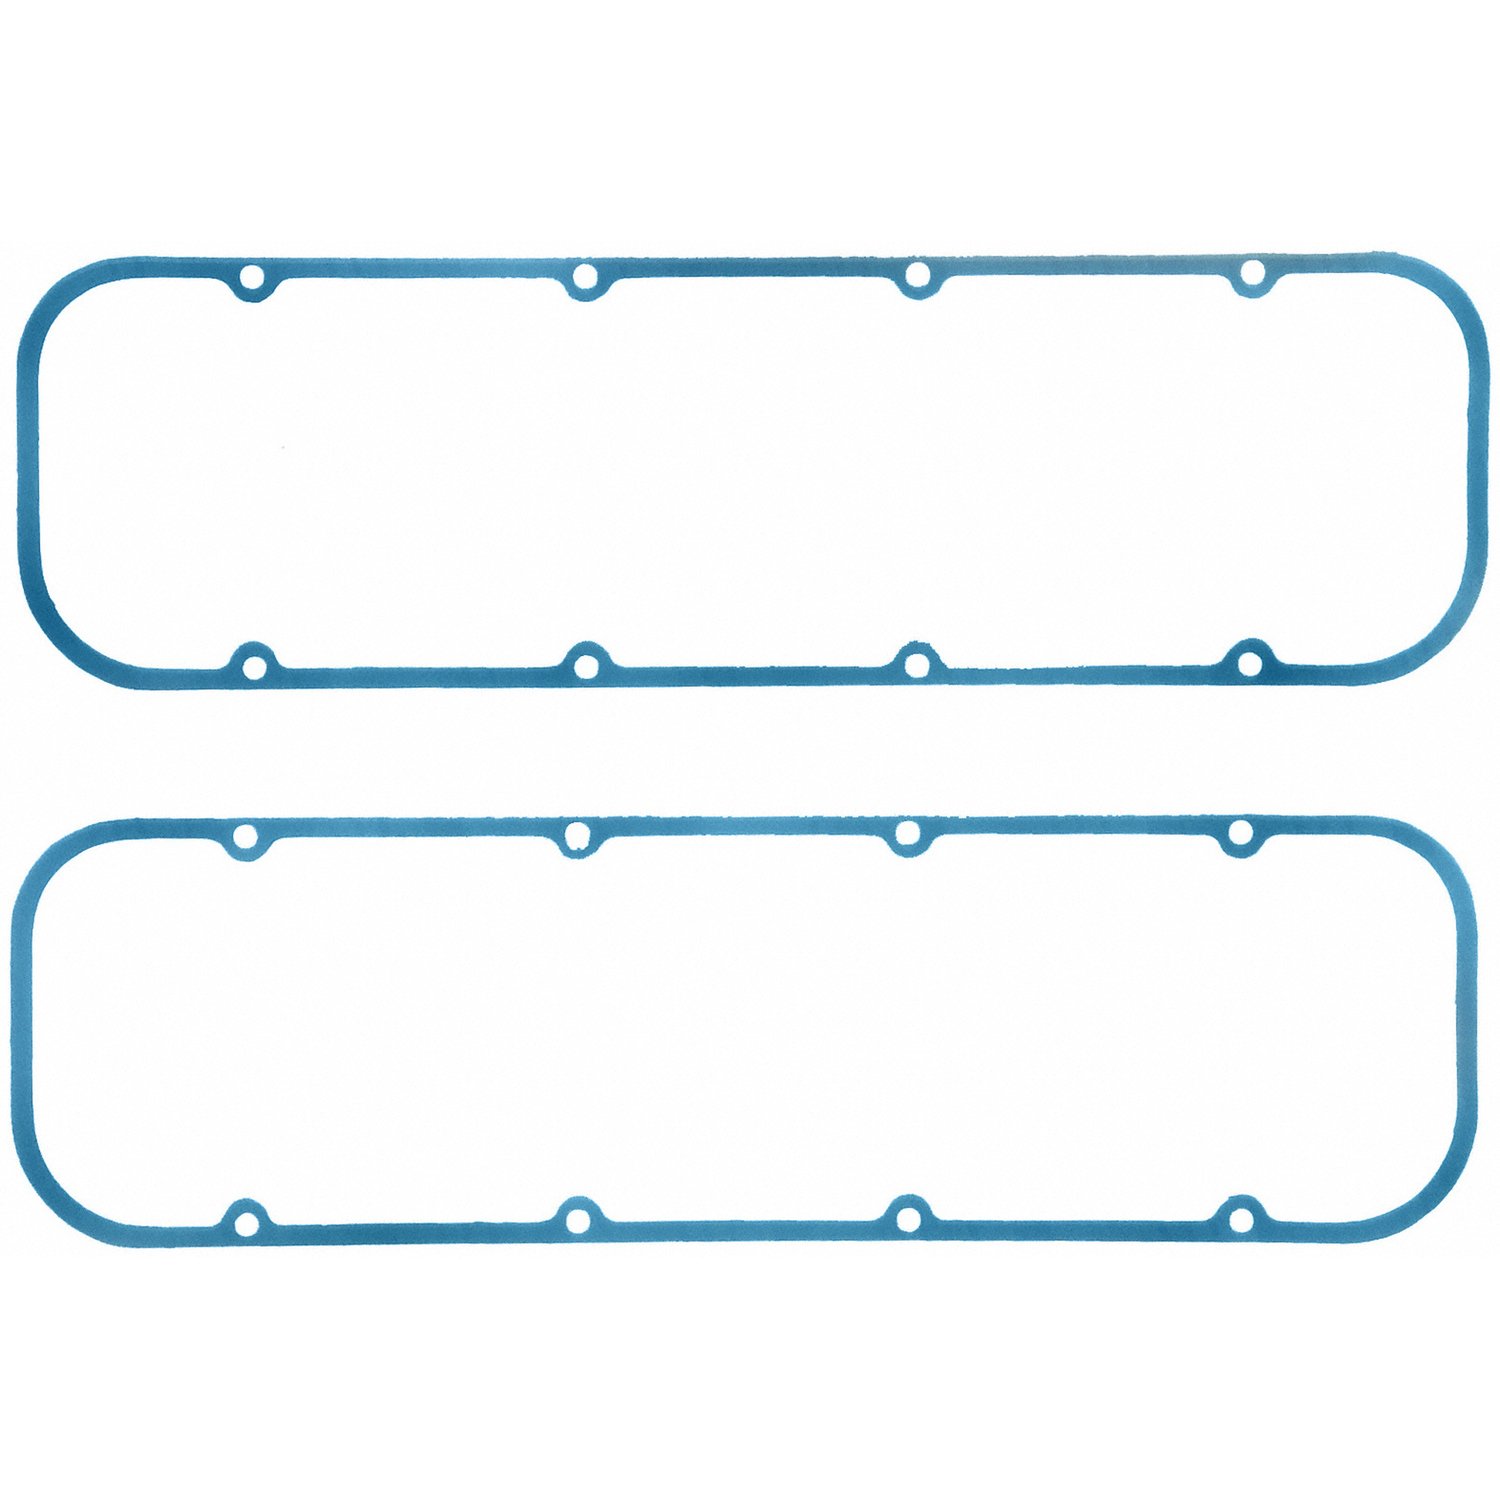 Valve Cover Gaskets 3/32" Composite Material Splayed Valve